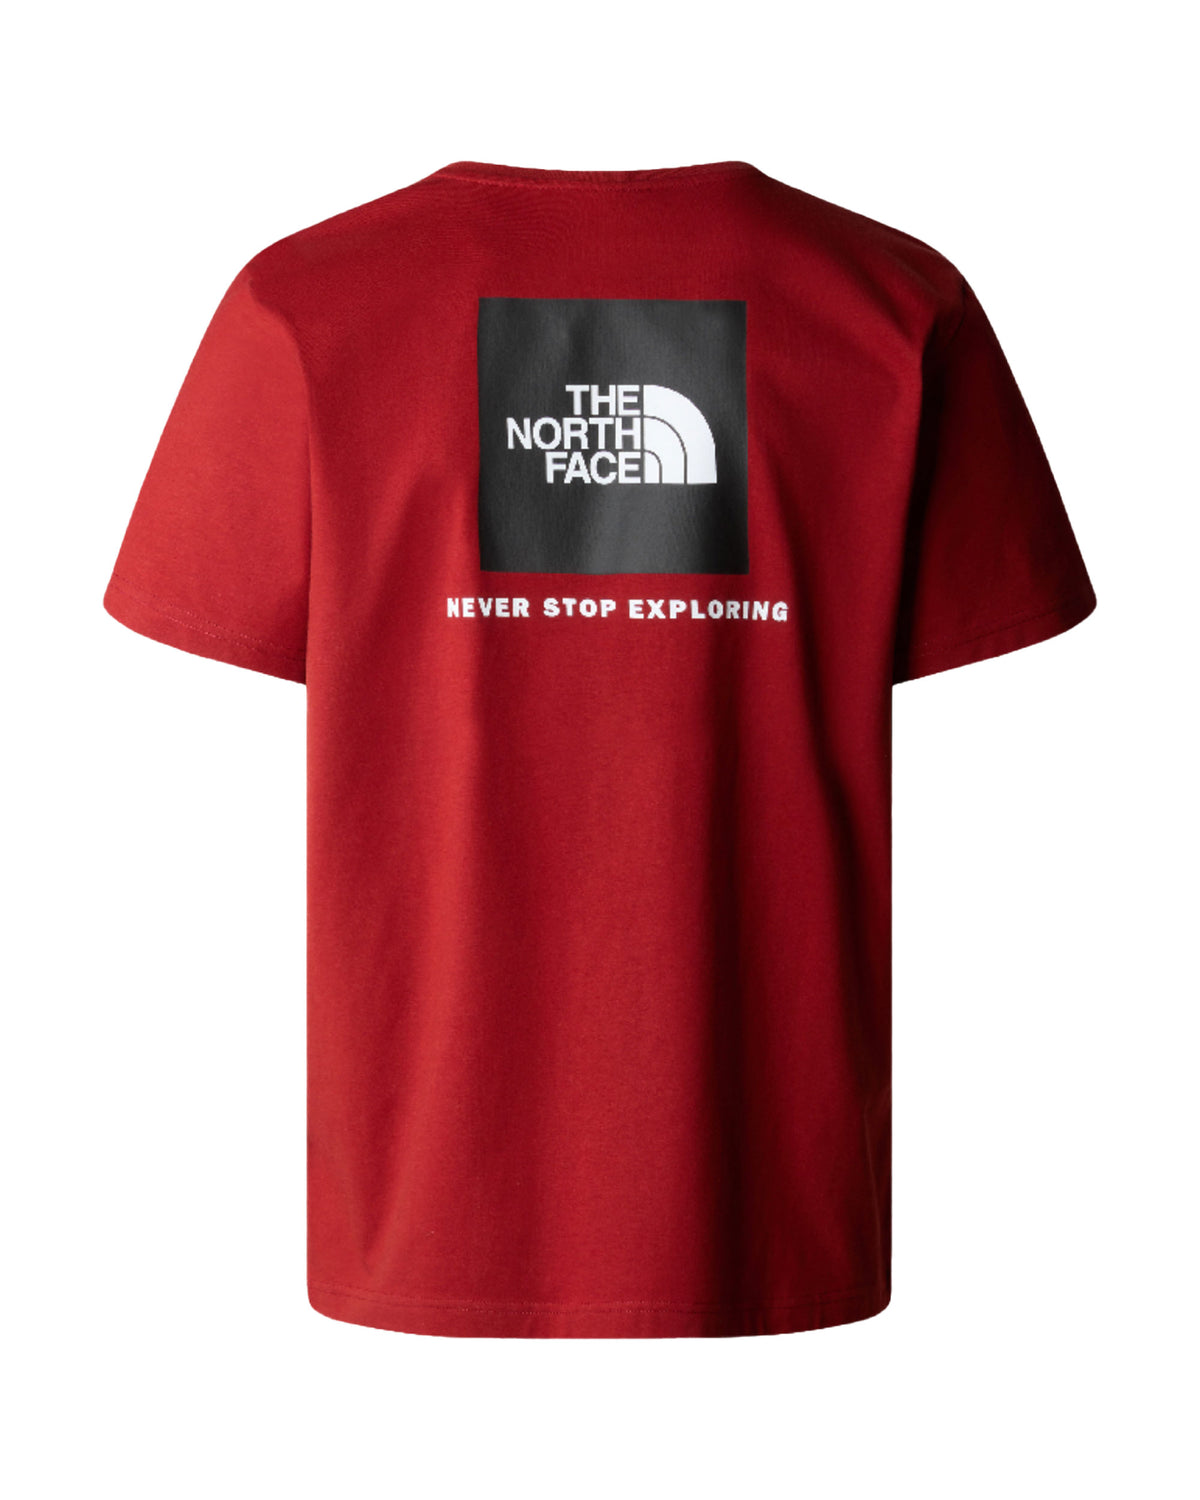 T-Shirt Uomo The North Face Redbox Iron Red